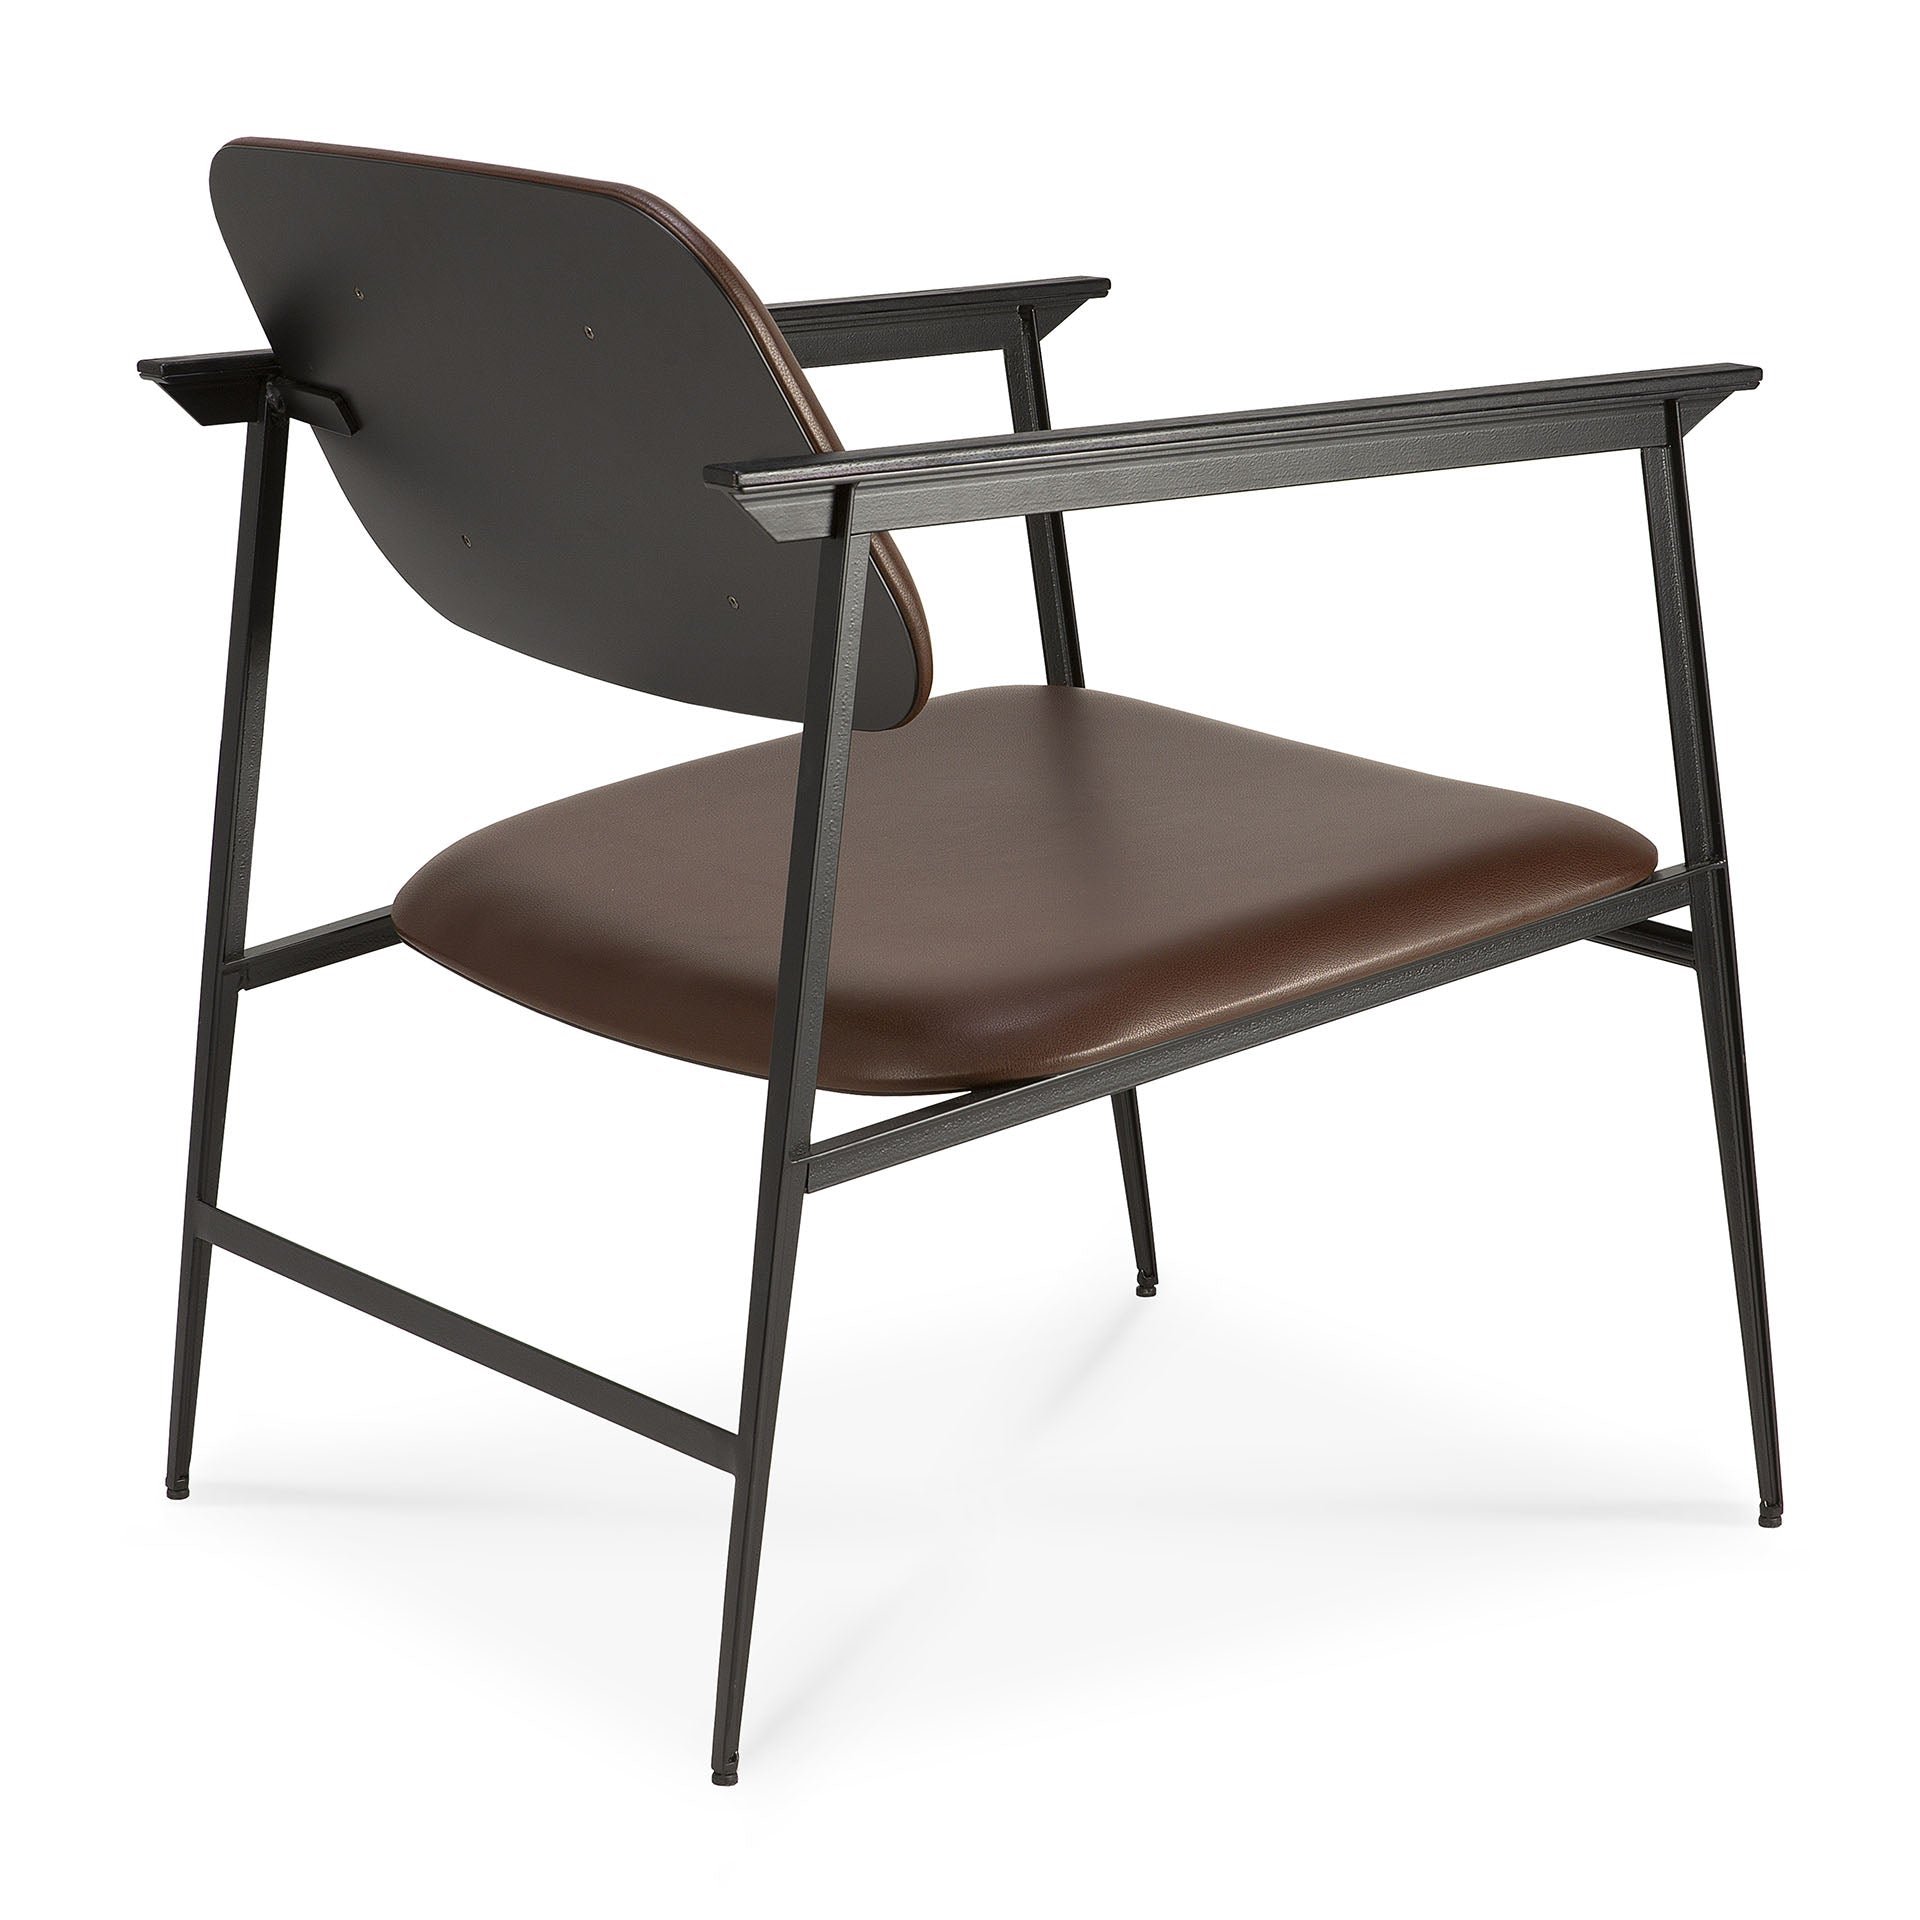 dc lounge chair by ethnicraft at adorn.house